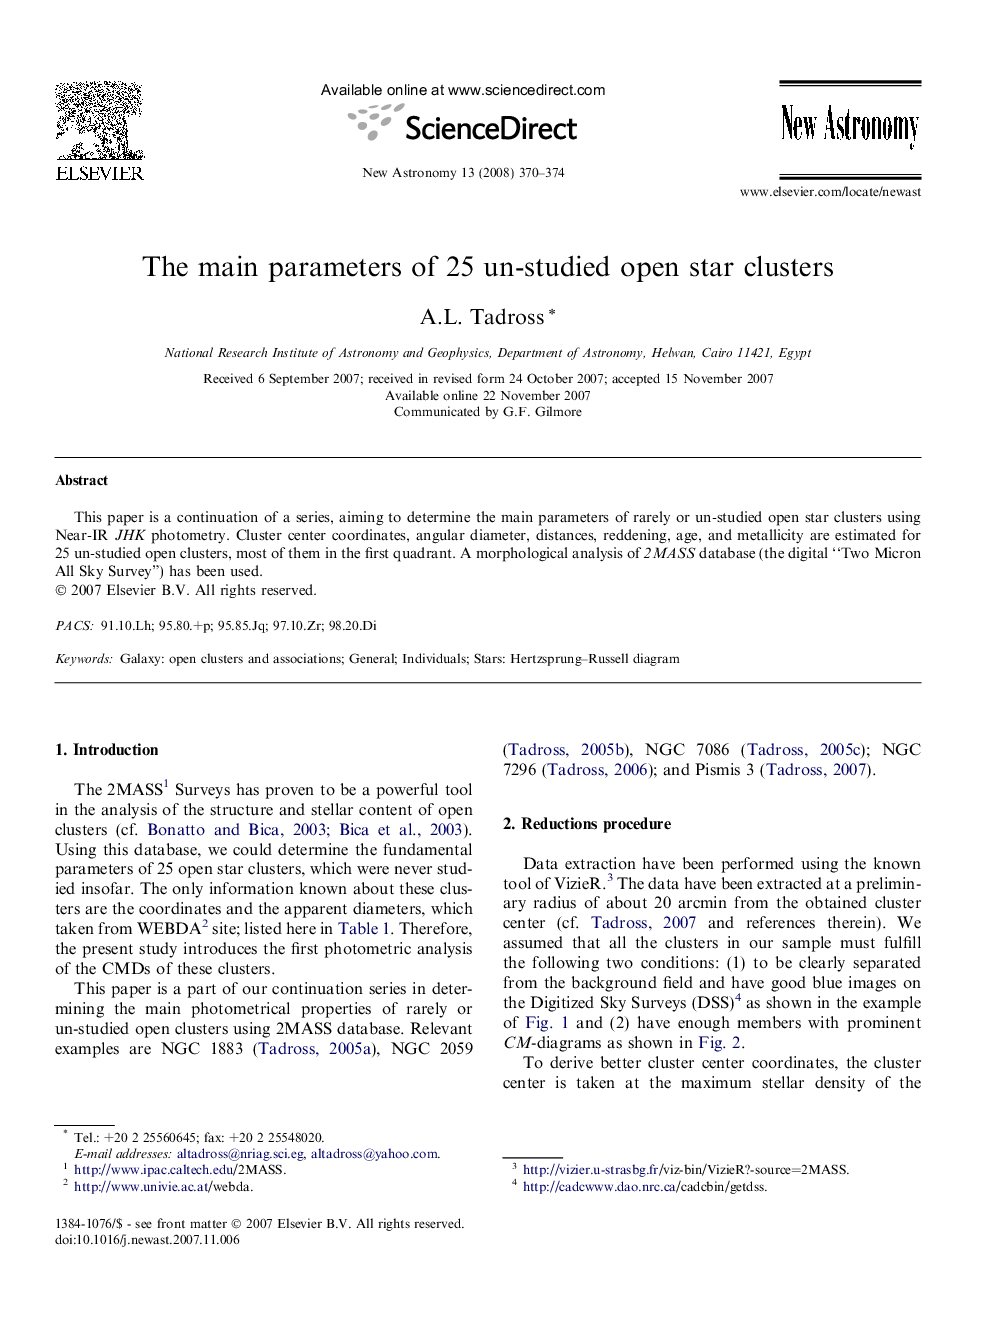 The main parameters of 25 un-studied open star clusters